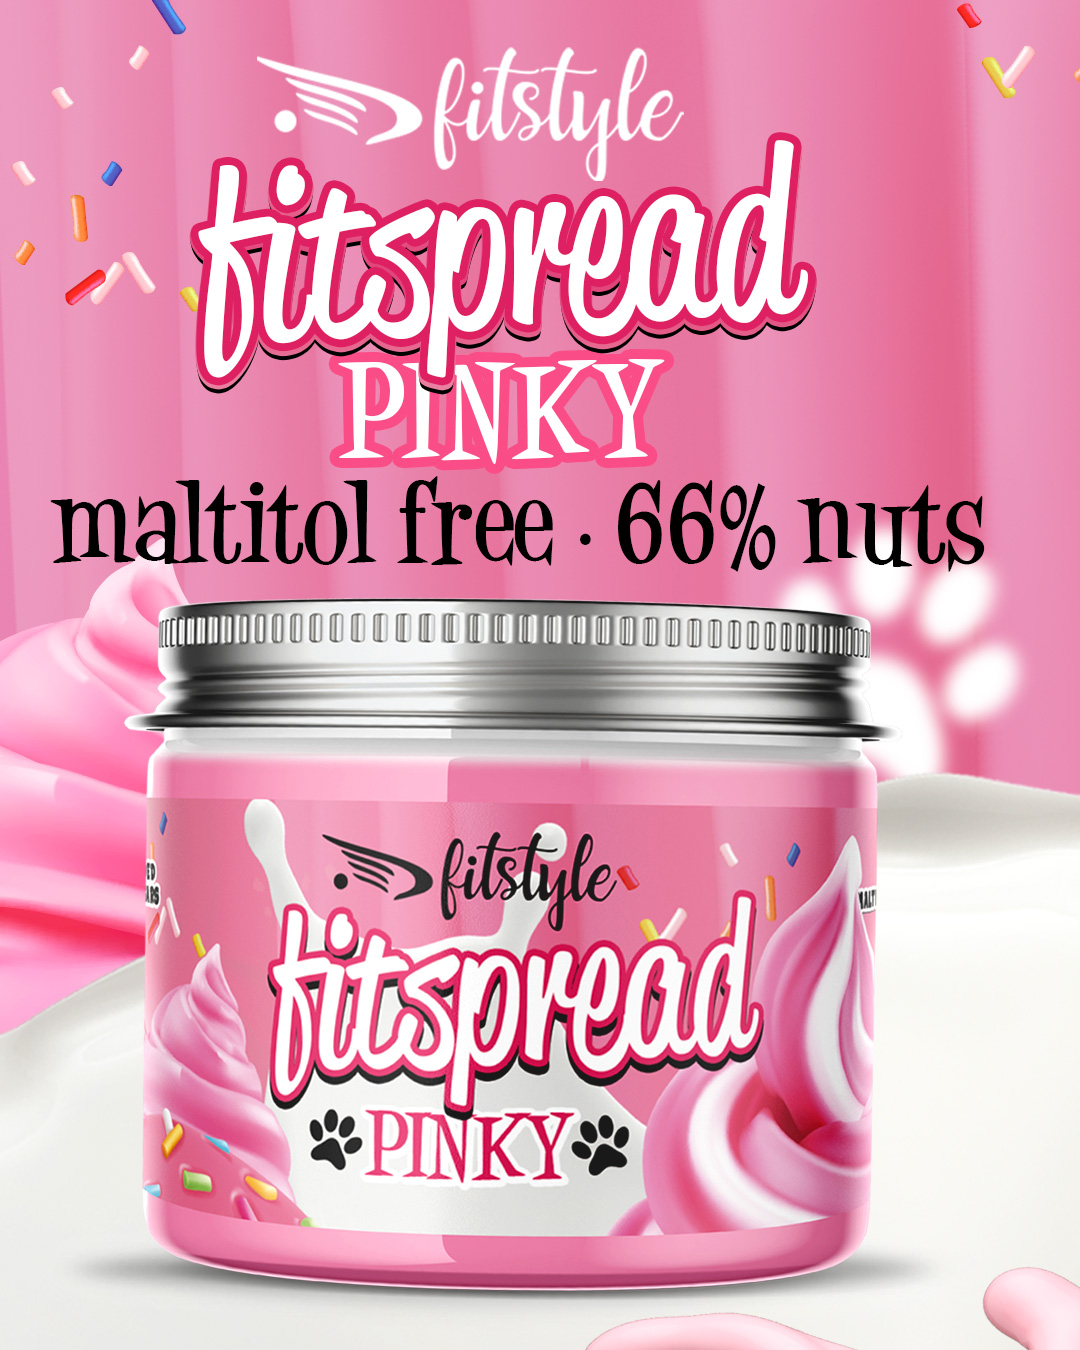 FITspread Pinky 200g FITSTYLE